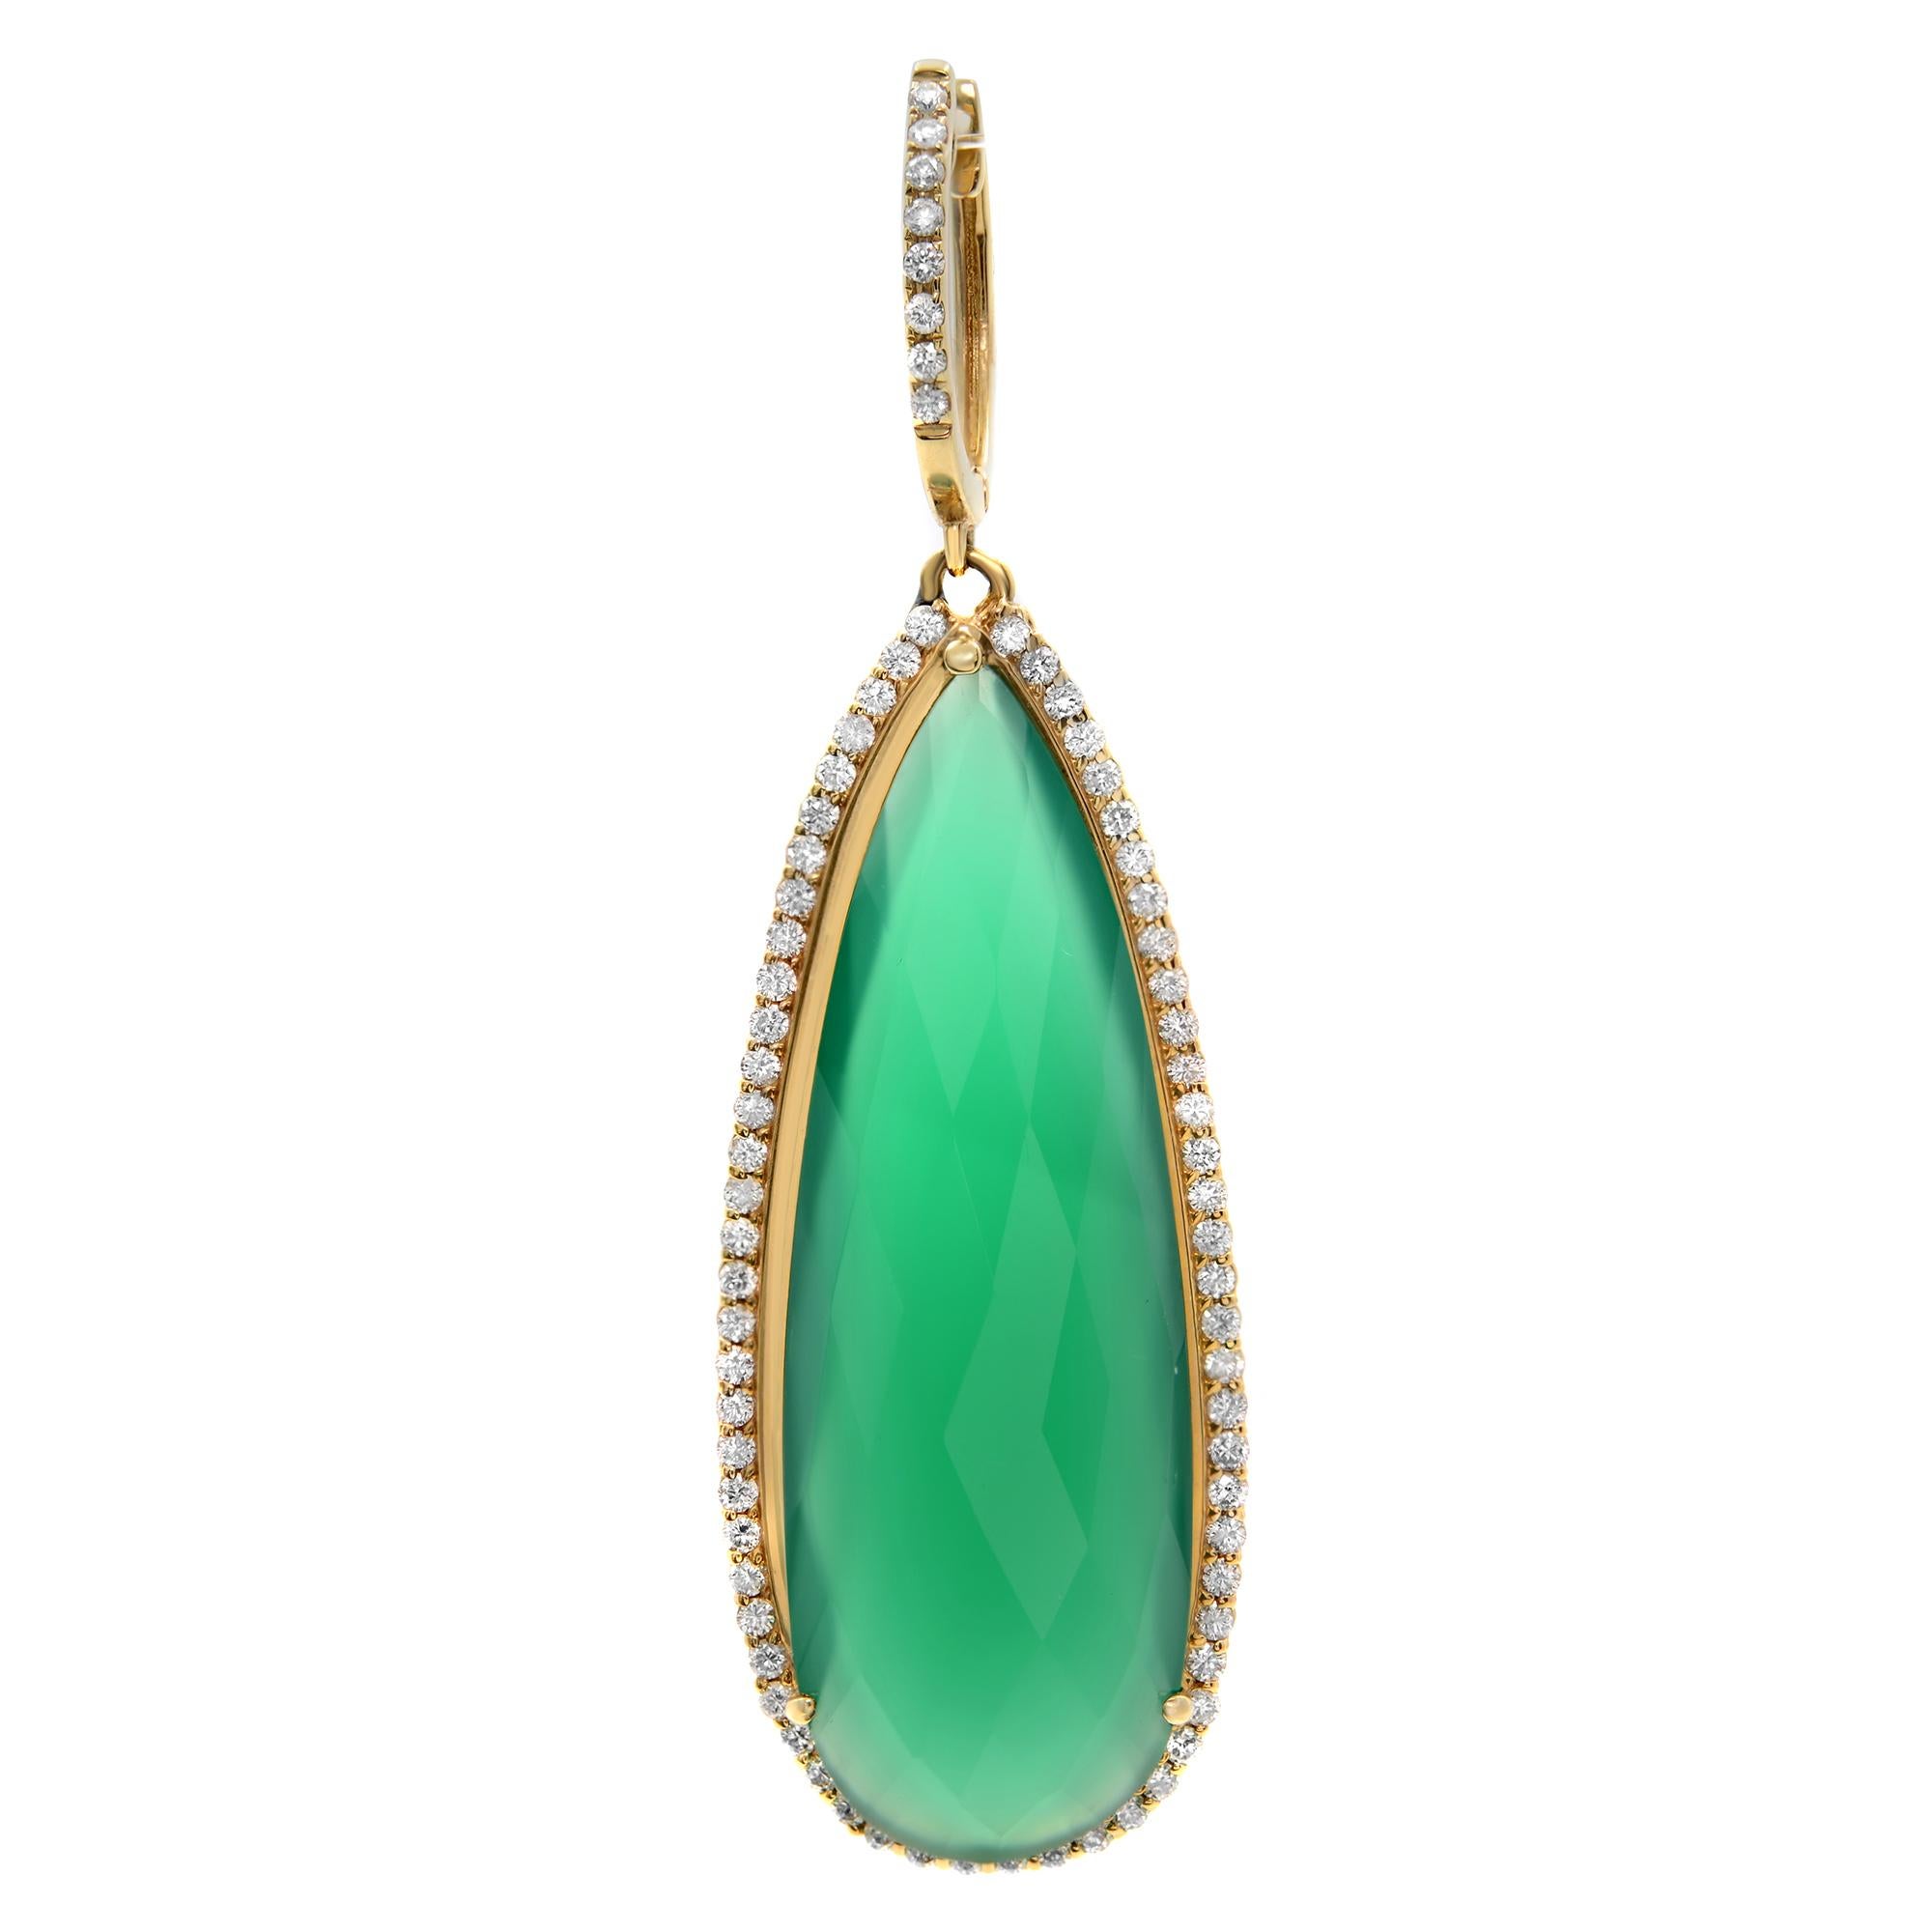 Bring prosperity and luck with these extra deep green statement earrings that will get you noticed. Pear Shape Green Onyx set with 1.36cttw of round cut diamonds, crafted in 14k yellow gold. Earring length: 2.25 inches. The earrings come in a